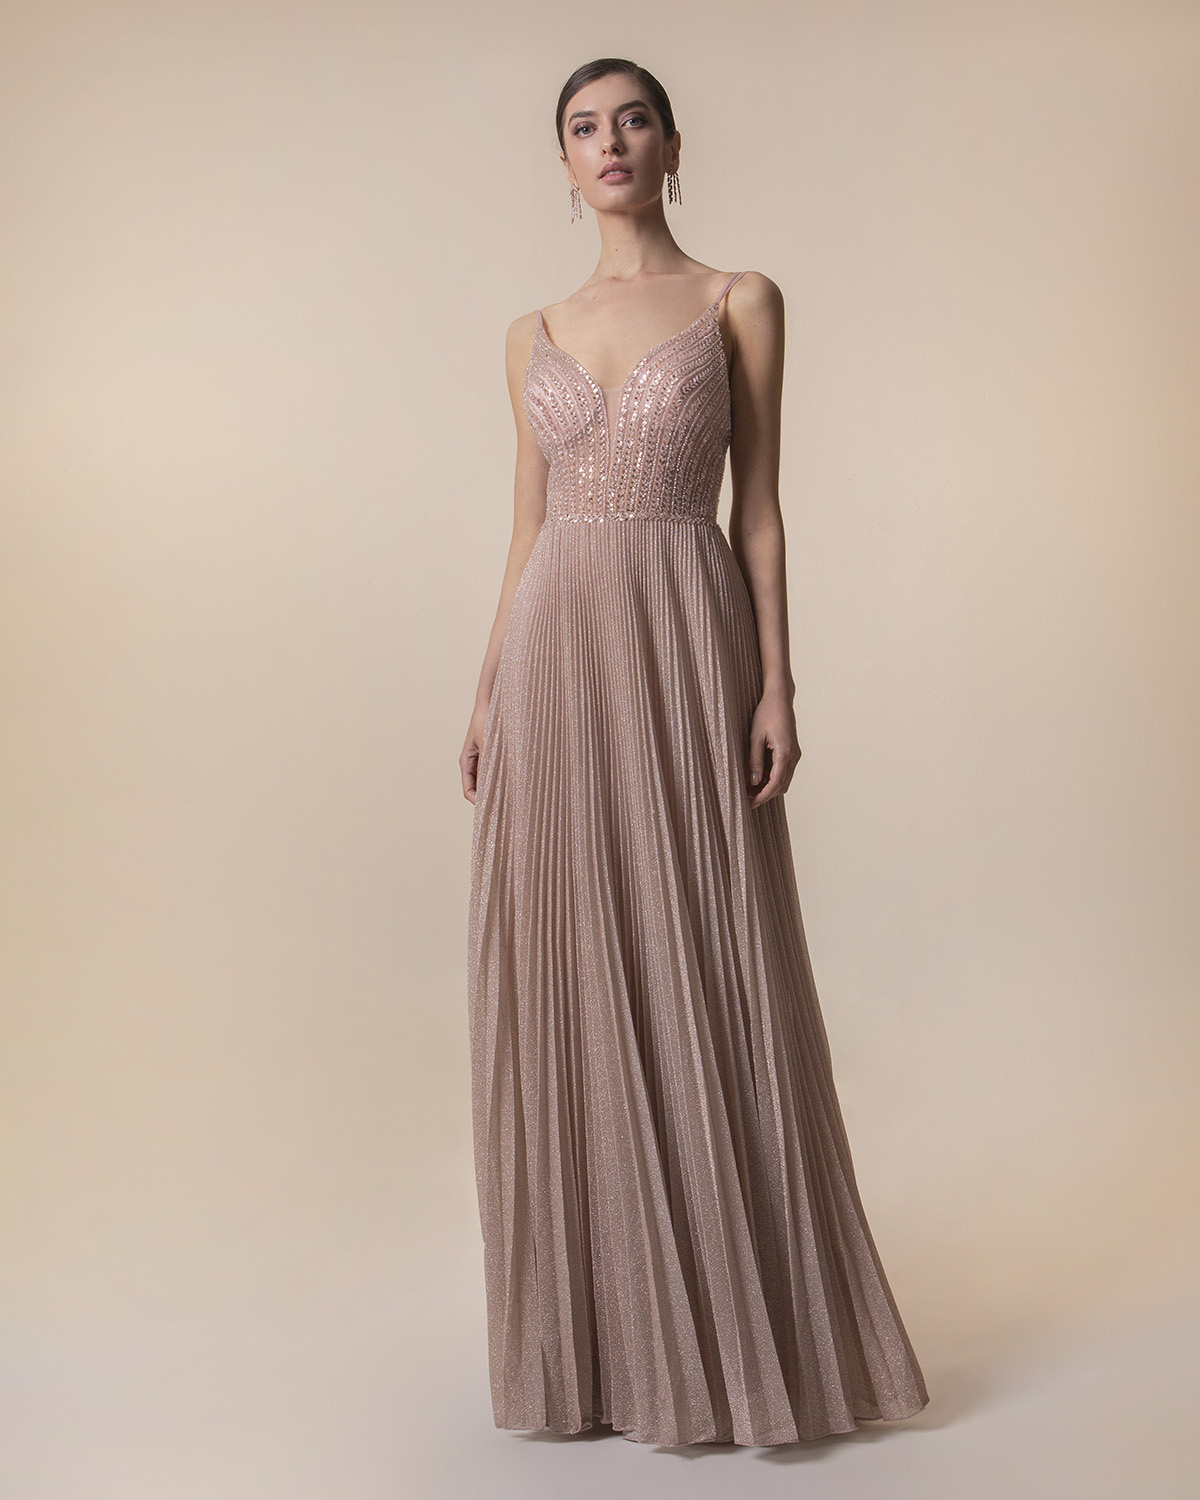 Evening Dresses / Long pleated evening dress with shining fabric and fully beaded top